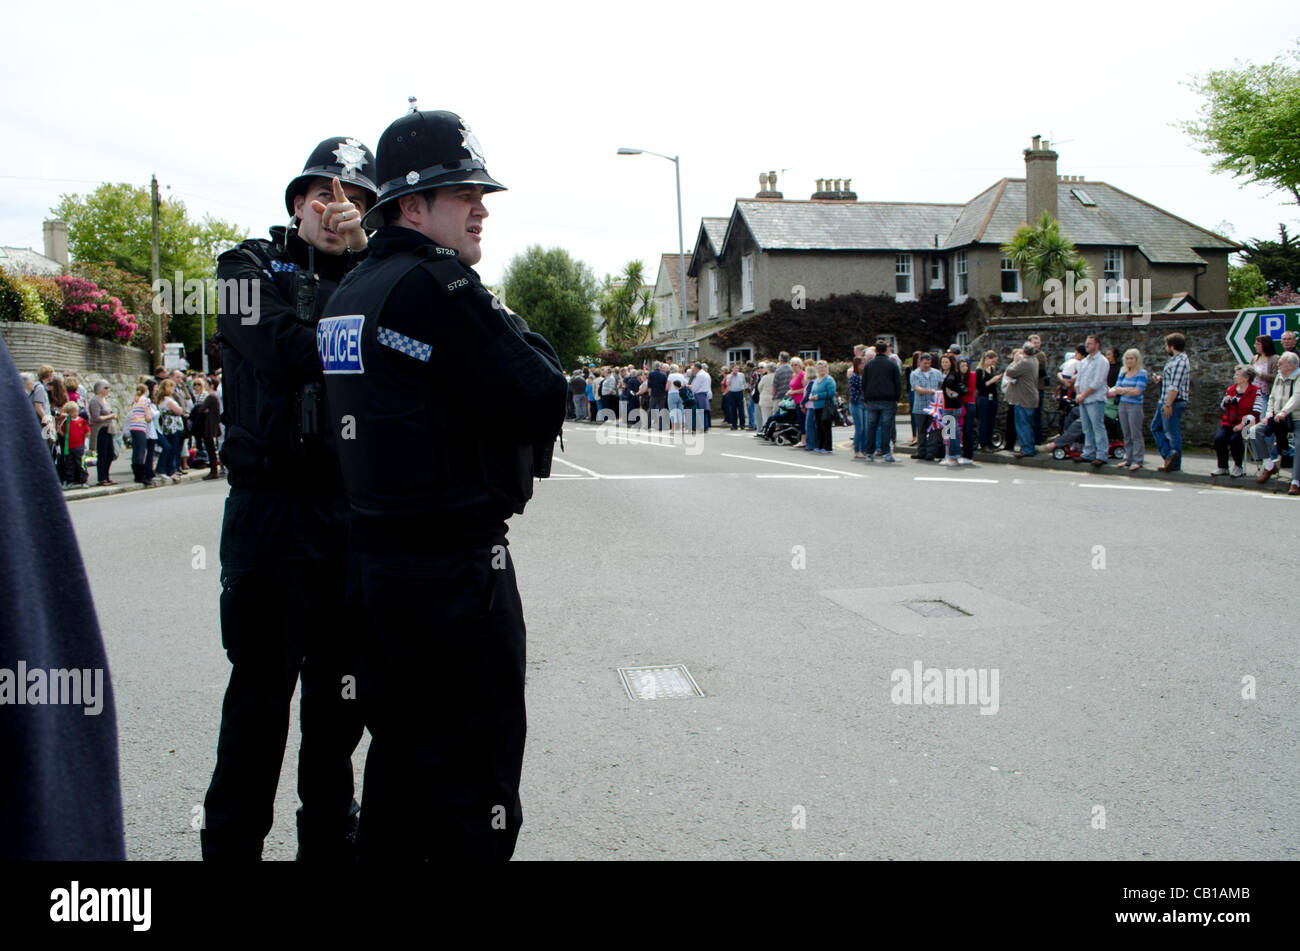 Police with crowd for falmouth Olympic torch Stock Photo